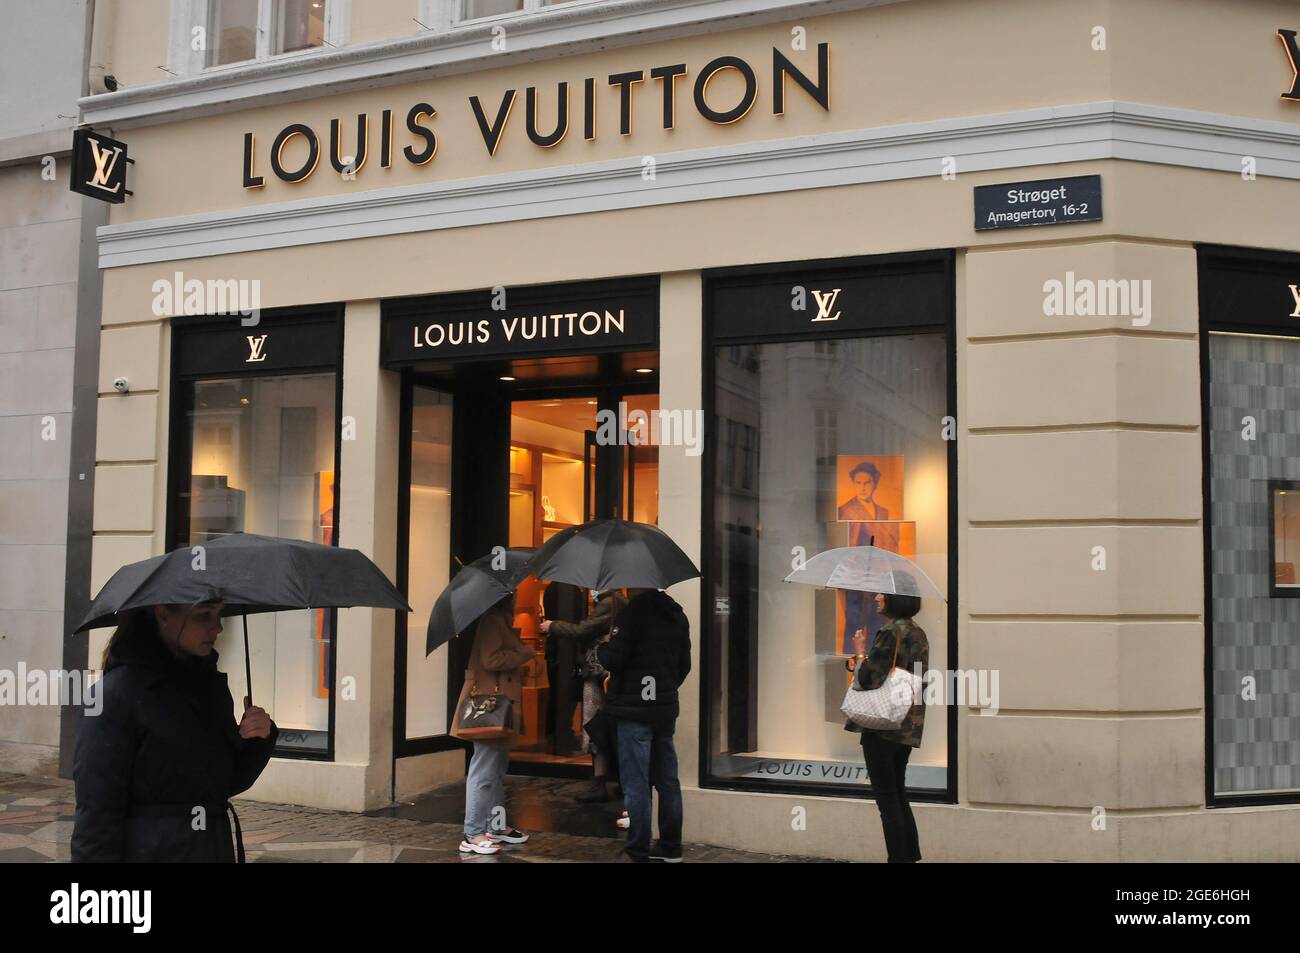 tage Samler blade nød Copenhagen, Denmark. 17 August 2021, Shoppers waiting at Louis Vuitton  store dueto social distancing in store due to covid-19 health issue. (Photo  Stock Photo - Alamy